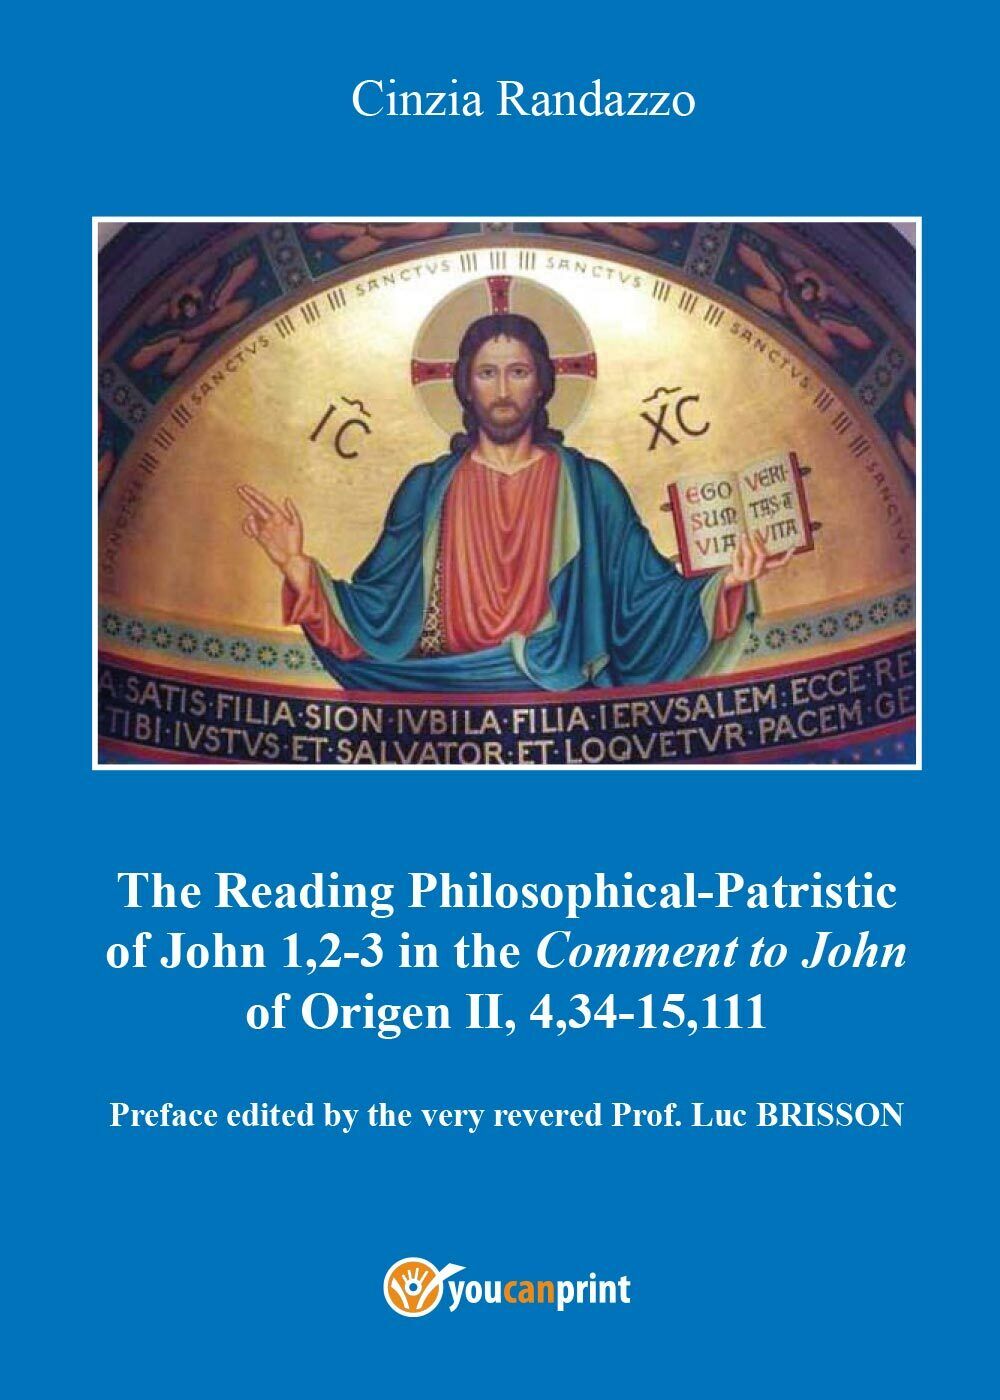 Reading philosophical-patristic of John 1,2-3 in the comment to John of Origen  libro usato